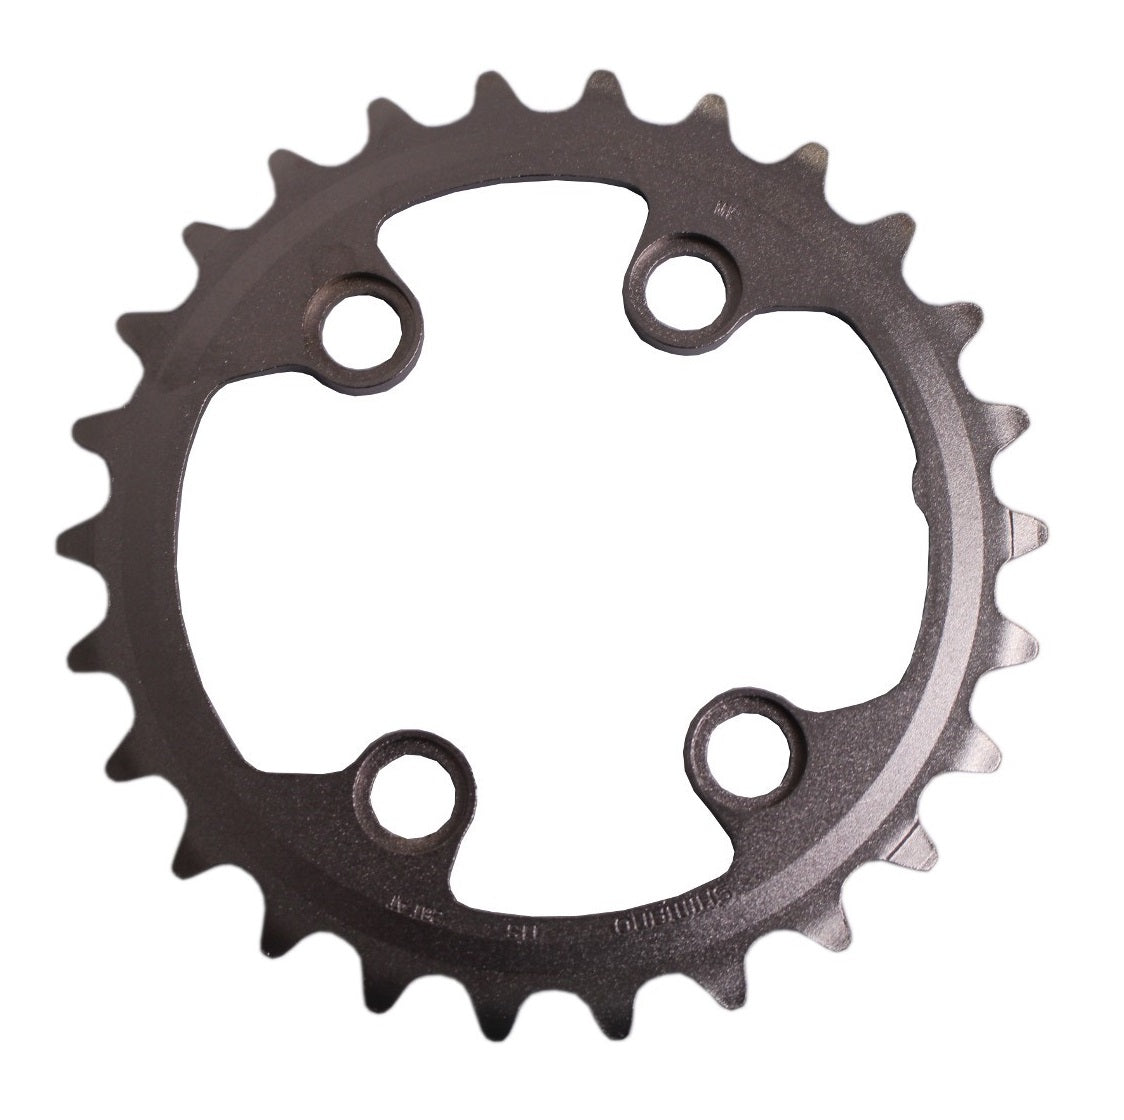 SHIMANO FC-M9000 鏈鉼片-26T-AT / SHIMANO FC-M9000 CHAINRING-26T-AT